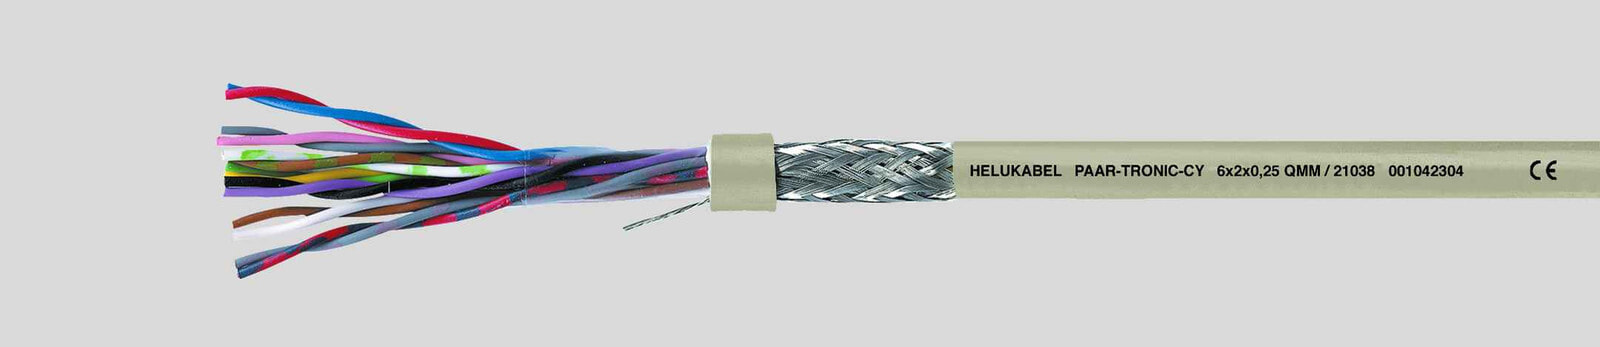 Helukabel PAAR-TRONIC-CY - High voltage cable - Grey - Polyvinyl chloride (PVC) - Polyvinyl chloride (PVC) - 0.25 mm² - 70 kg/km